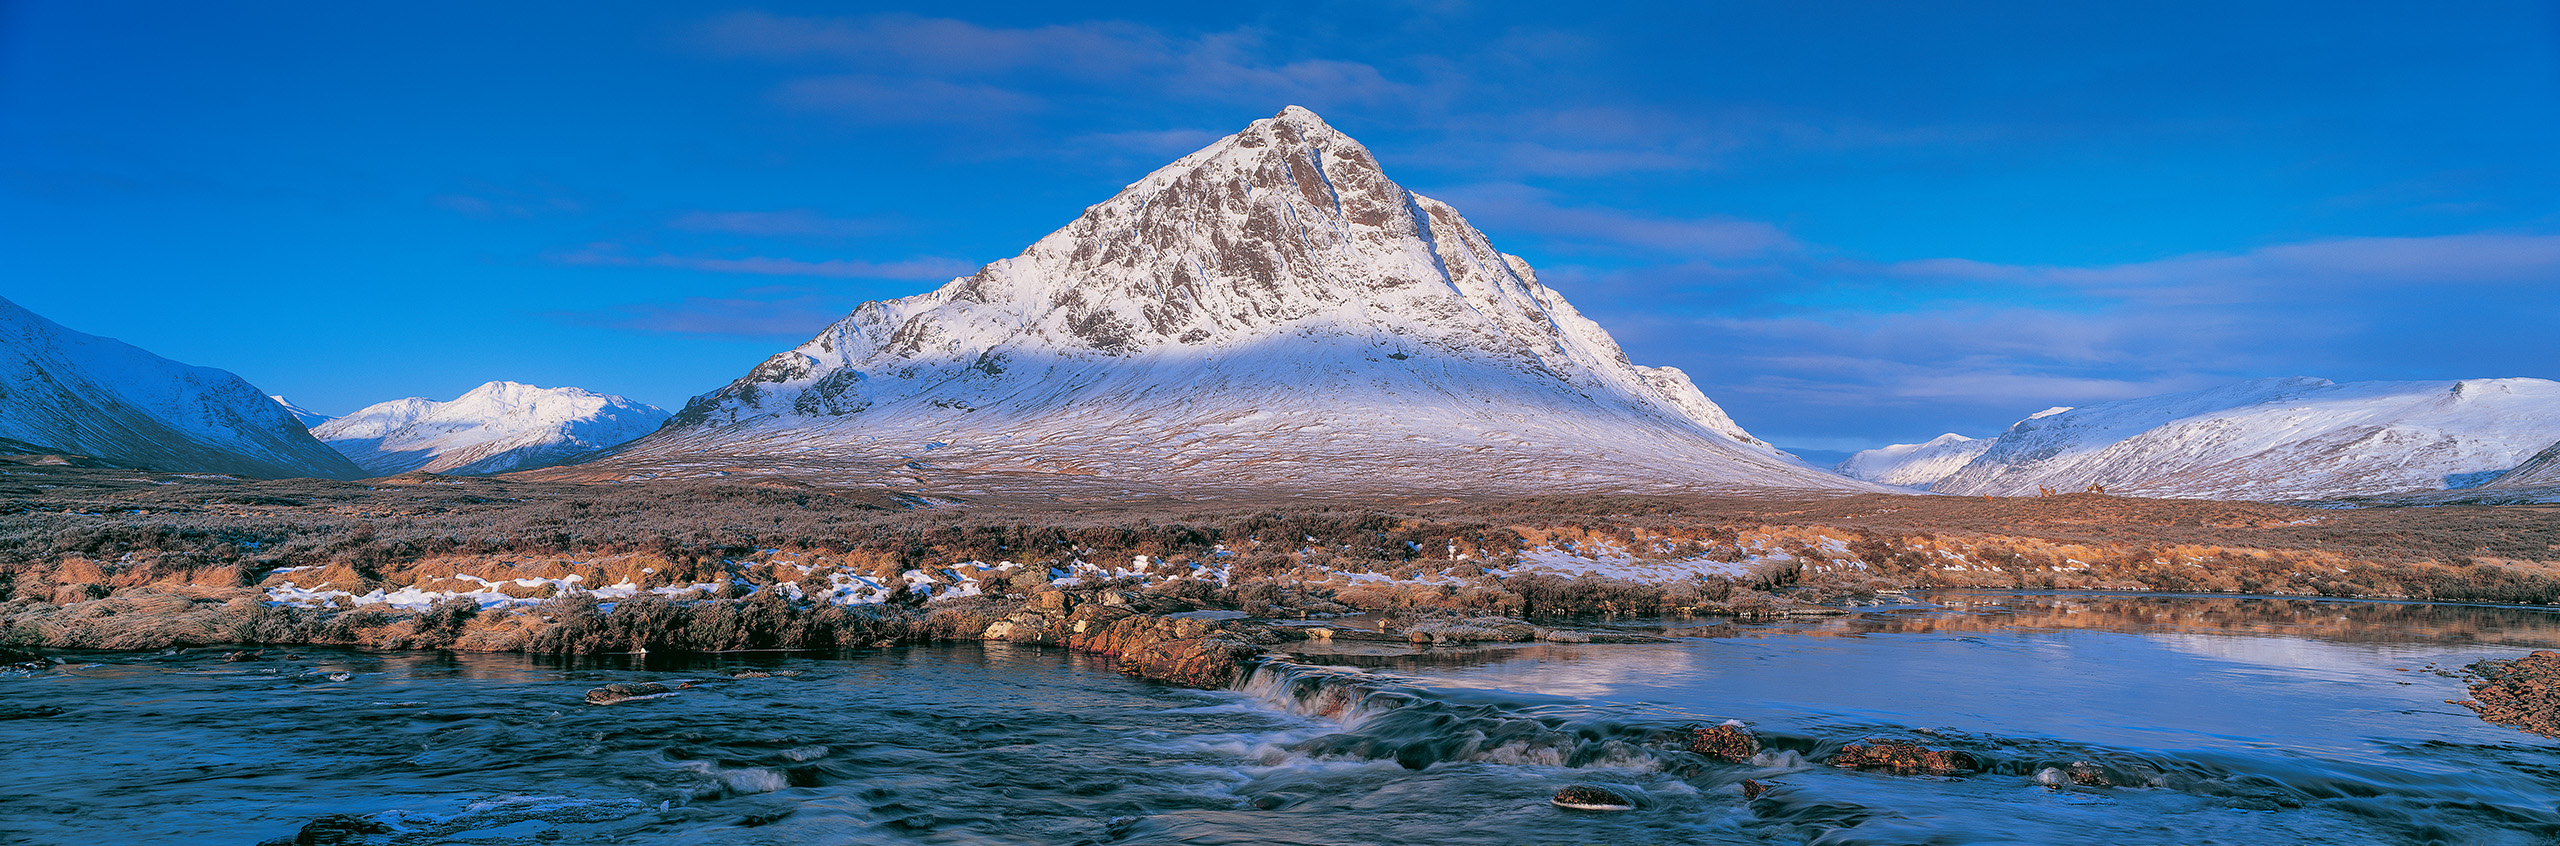 The Buachaille Etive Mòr in Winter - A Fine Art Print by Mountain Images